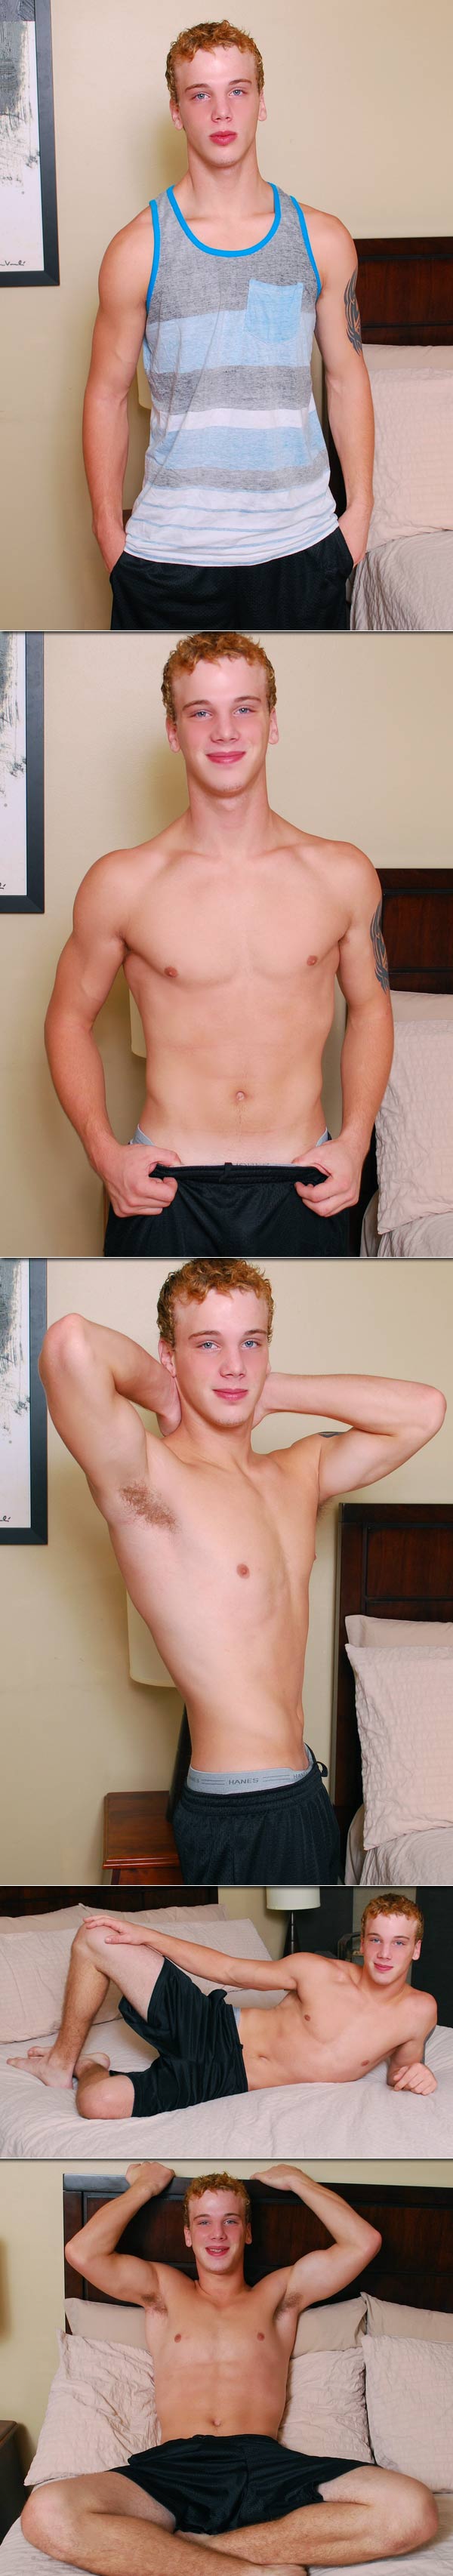 Troy Admiral at CollegeDudes.com